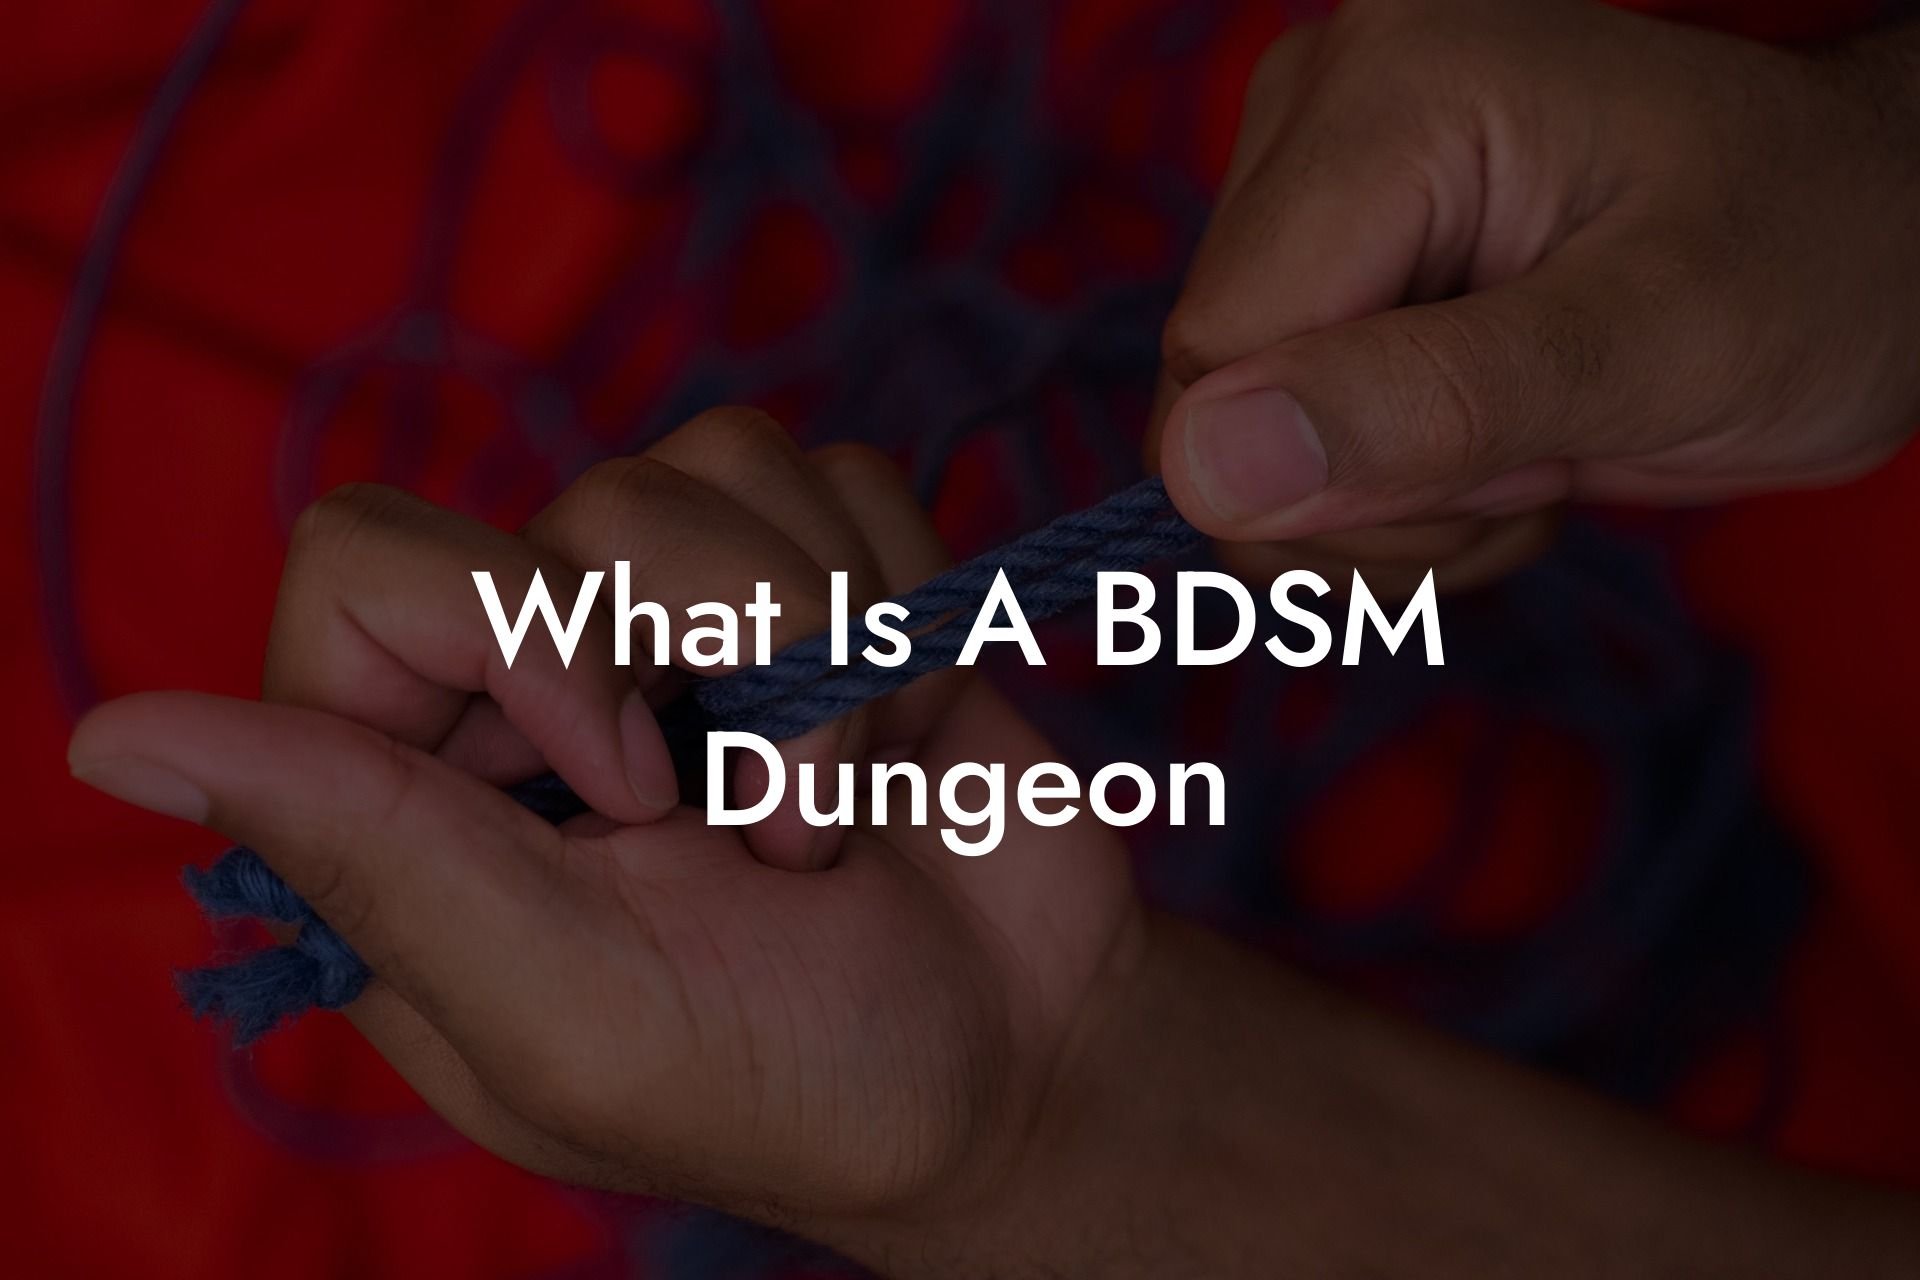 What Is A BDSM Dungeon